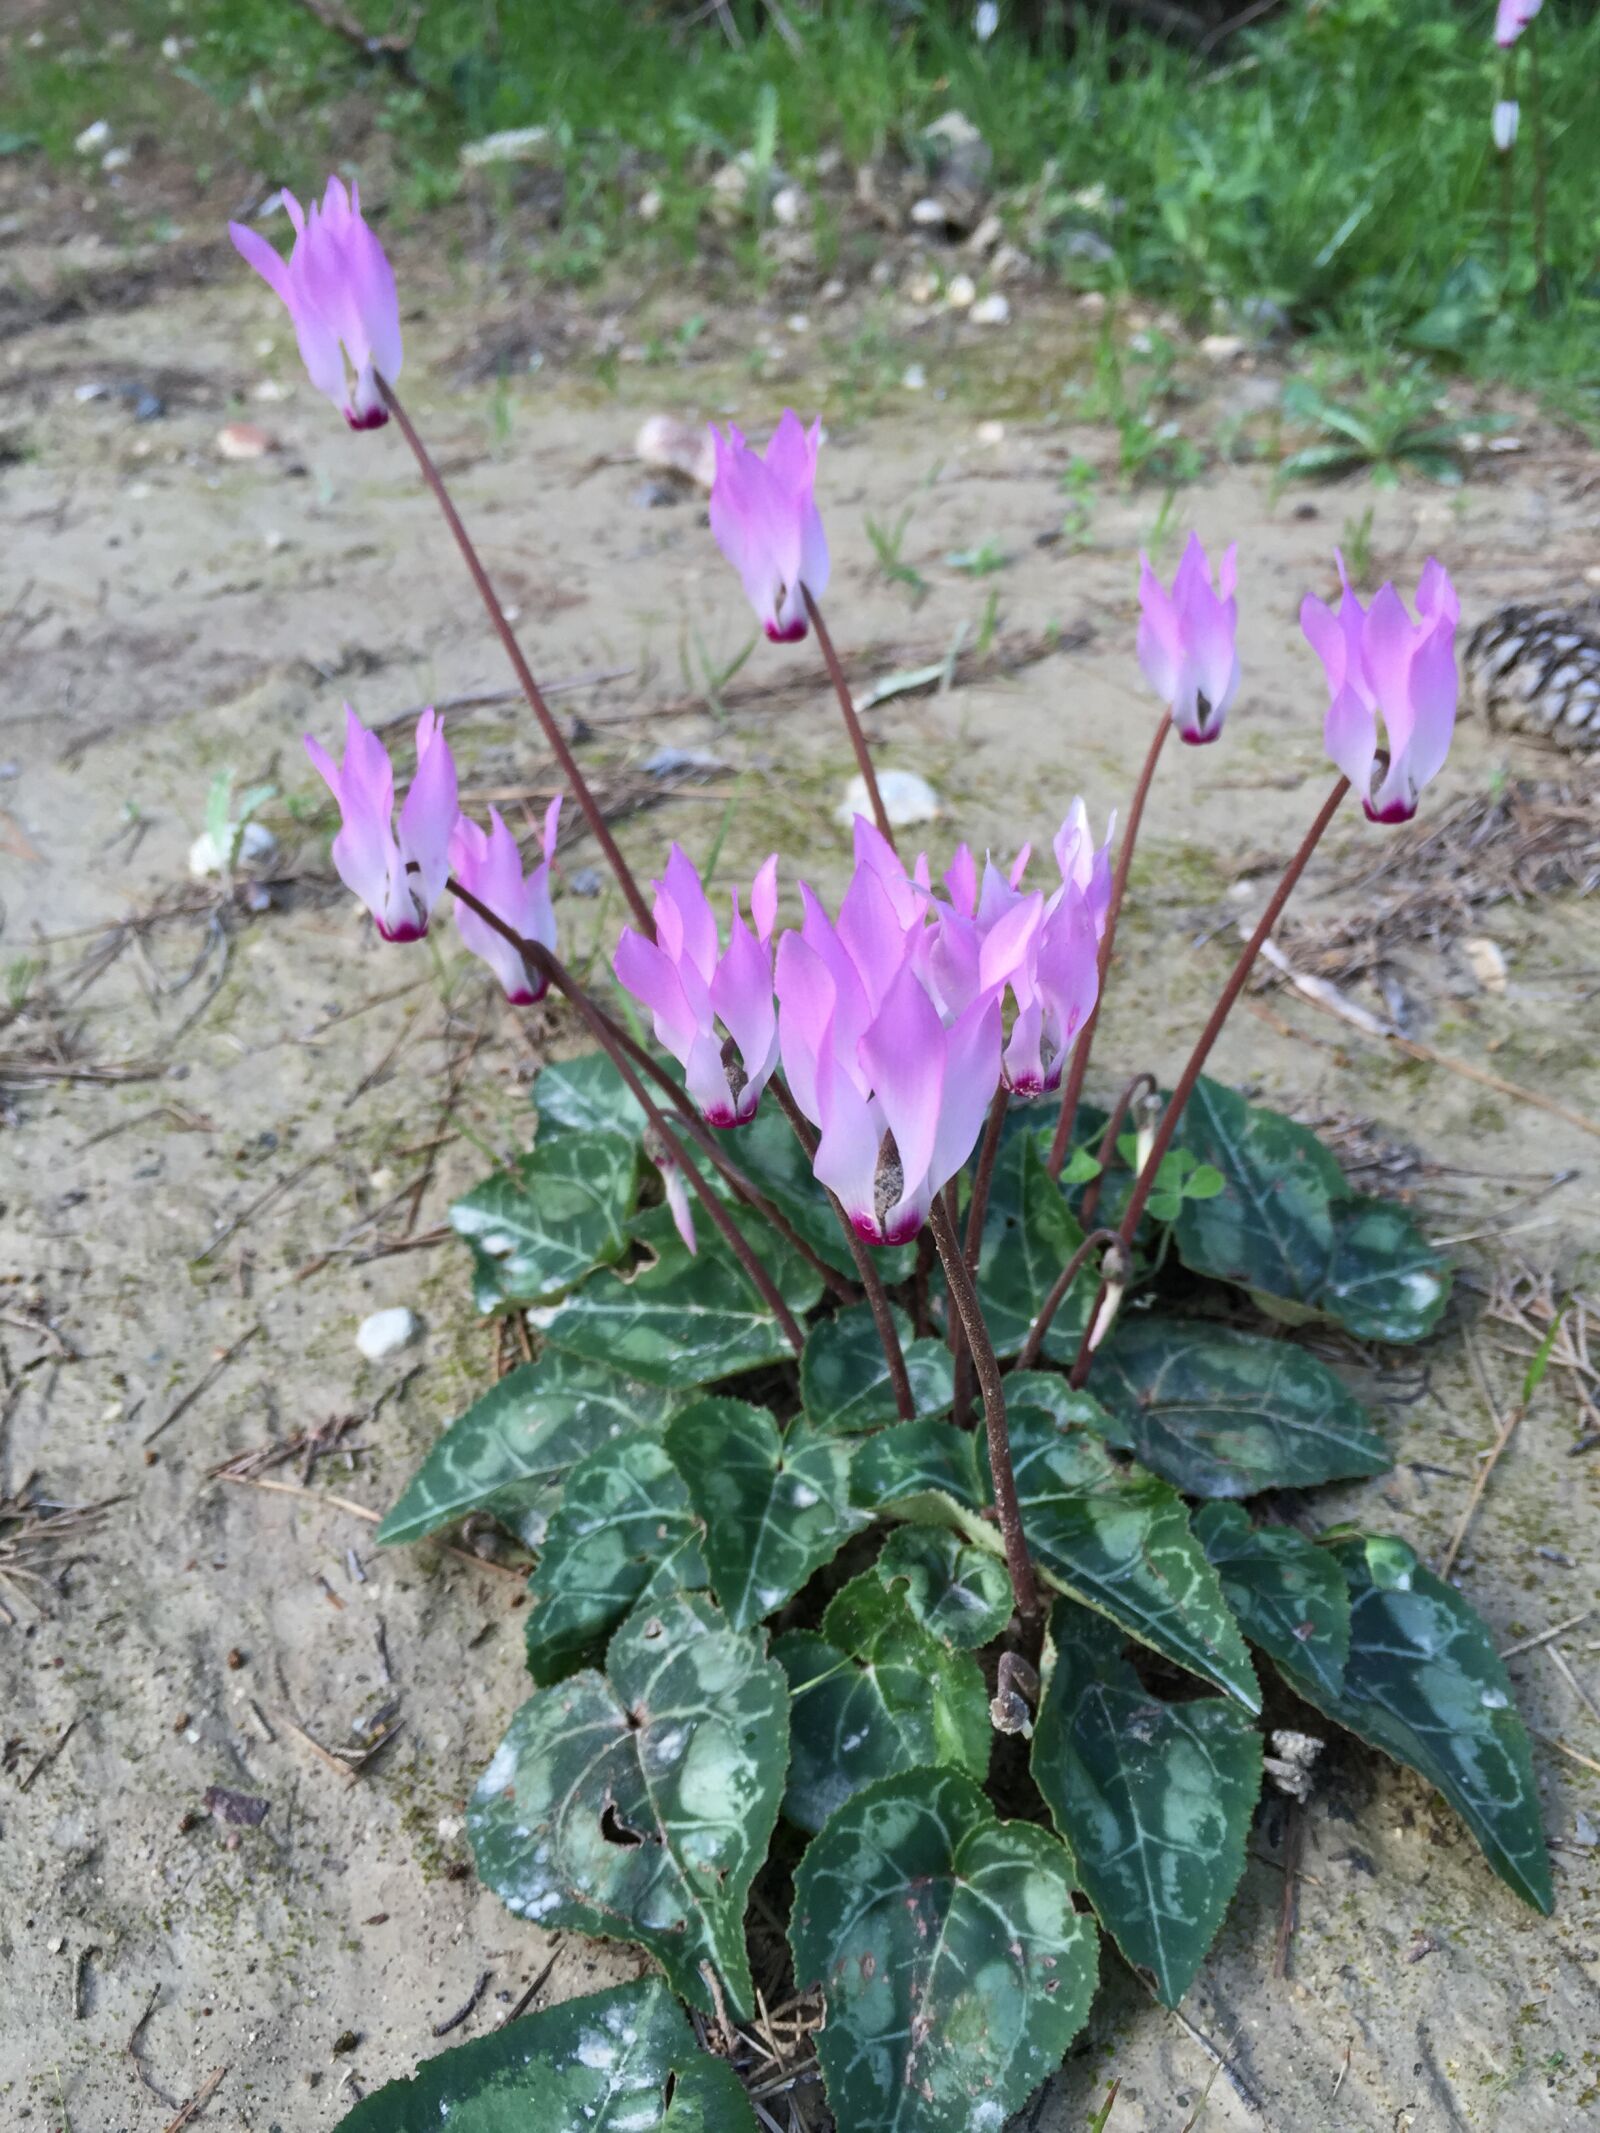 Apple iPhone 6 + iPhone 6 back camera 4.15mm f/2.2 sample photo. Cyclamens, flowers, nature photography